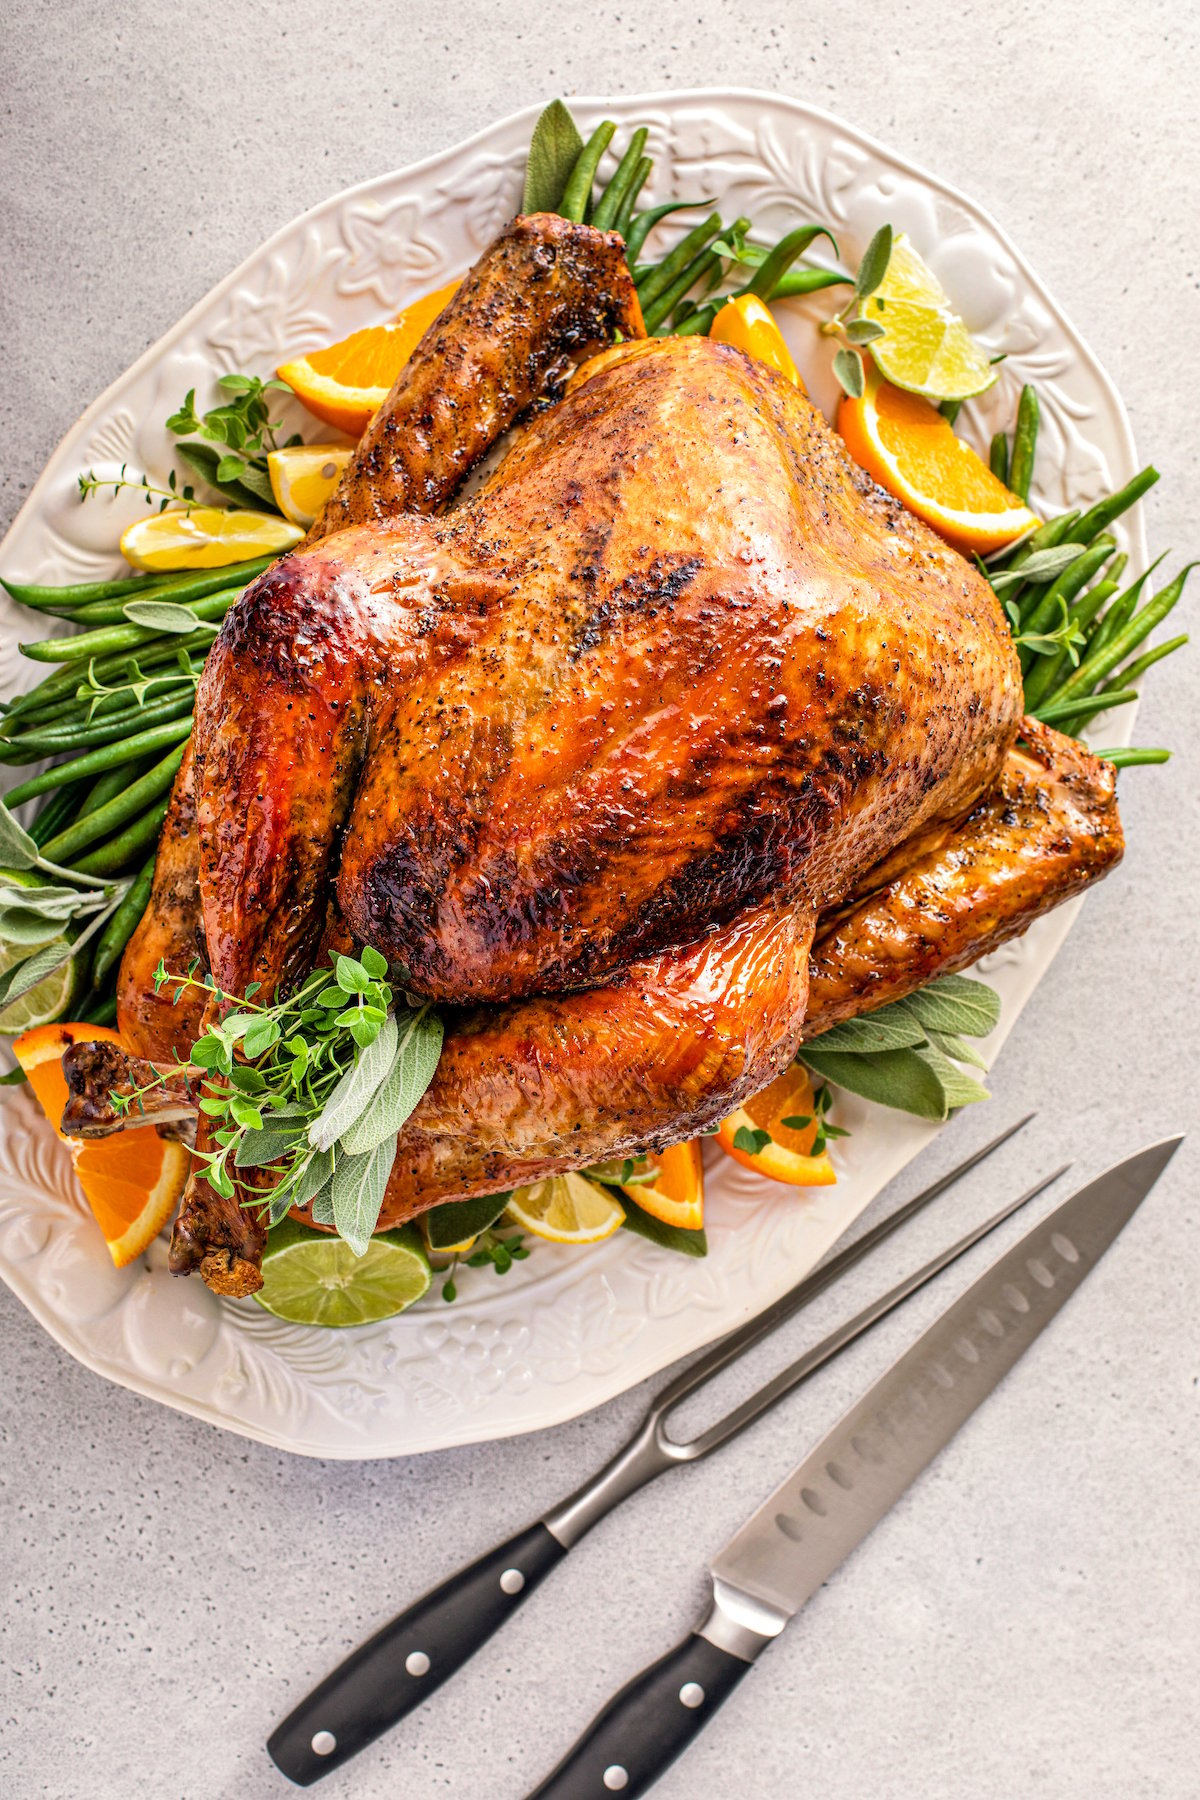 Whole cooked thanksgiving turkey with crispy golden brown skin on a serving platter.